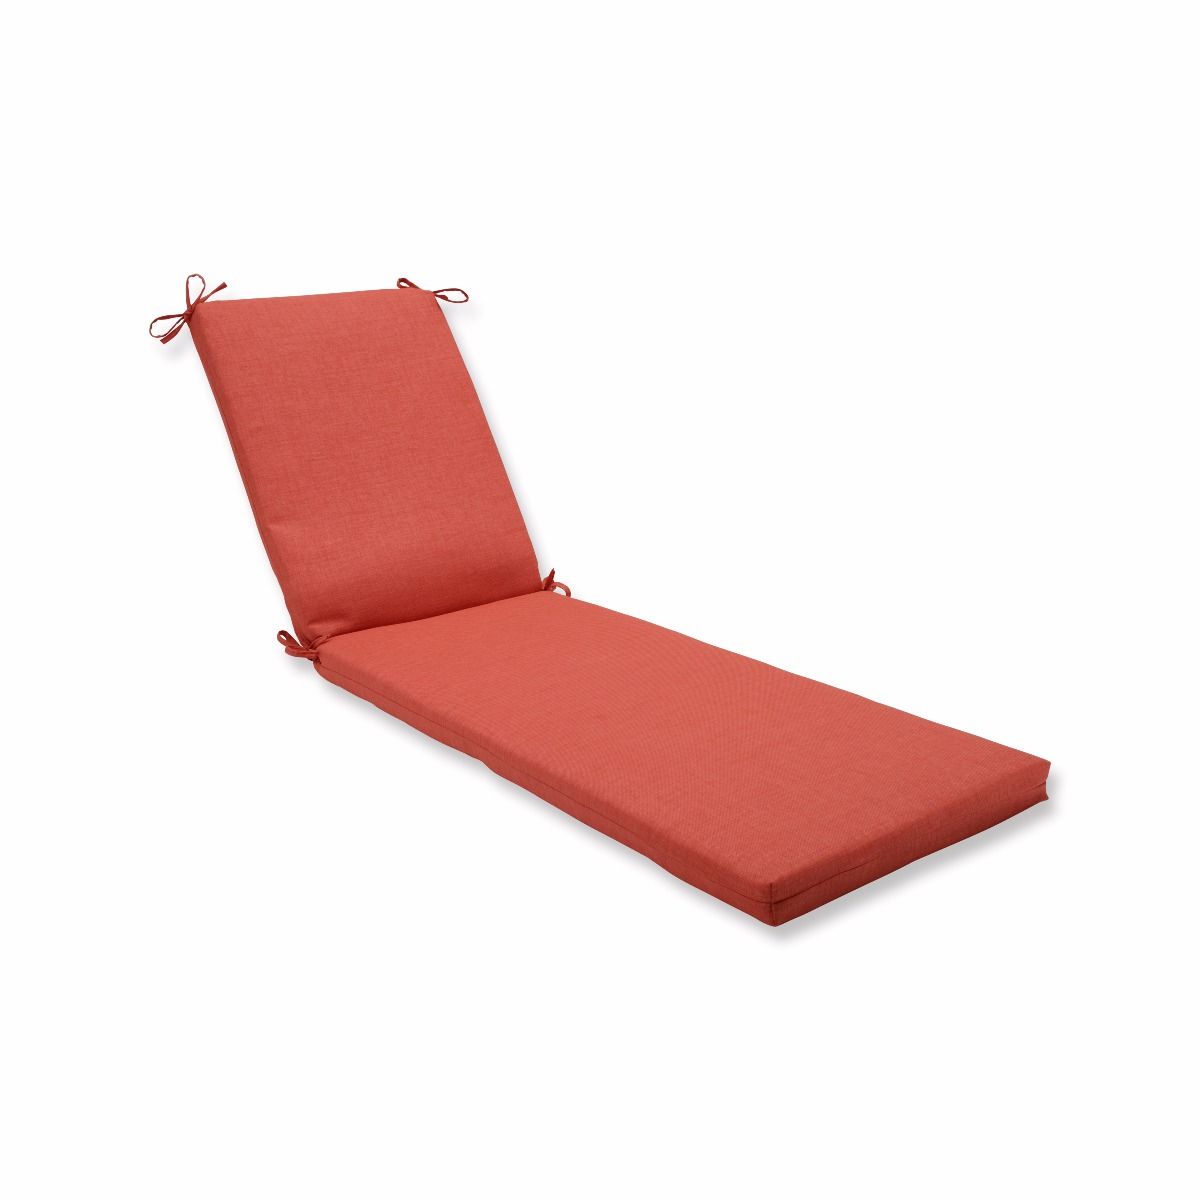 Pillow Perfect 80" Orange Solid Outdoor Patio Chaise Lounge Cushion with Ties